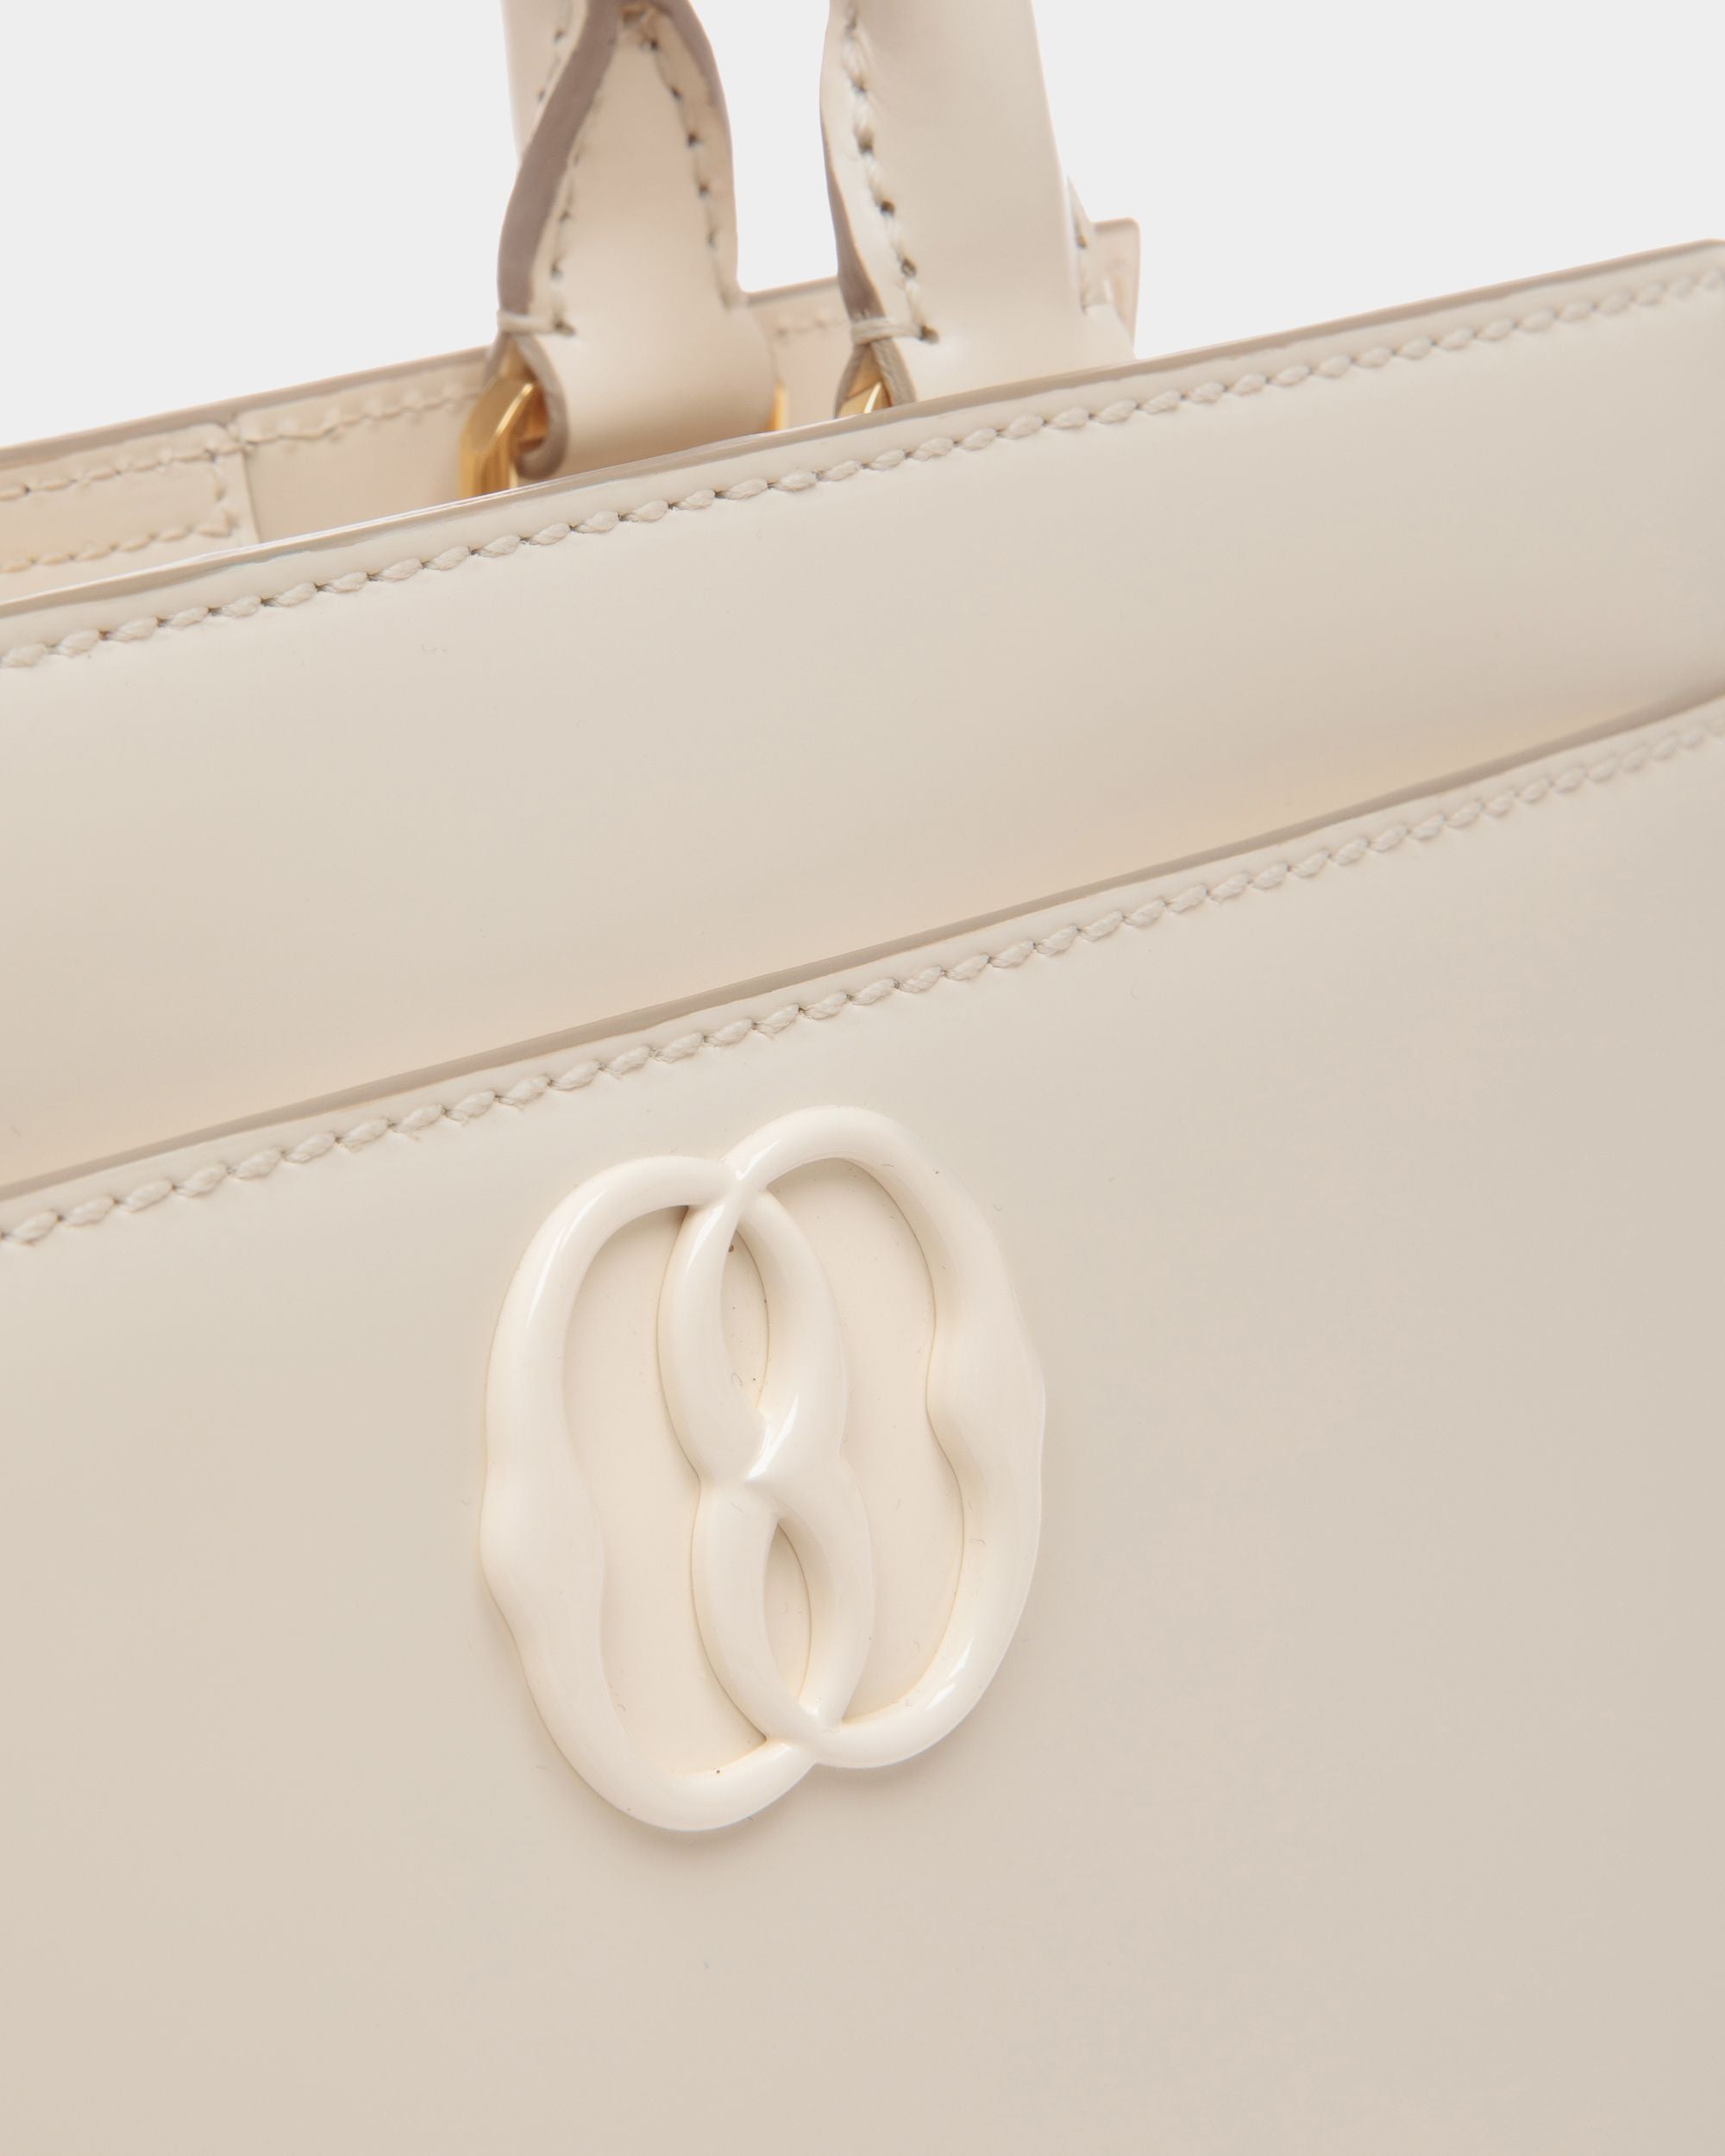 Emblem | Women's Small Tote Bag in White Brushed Leather | Bally | Still Life Detail